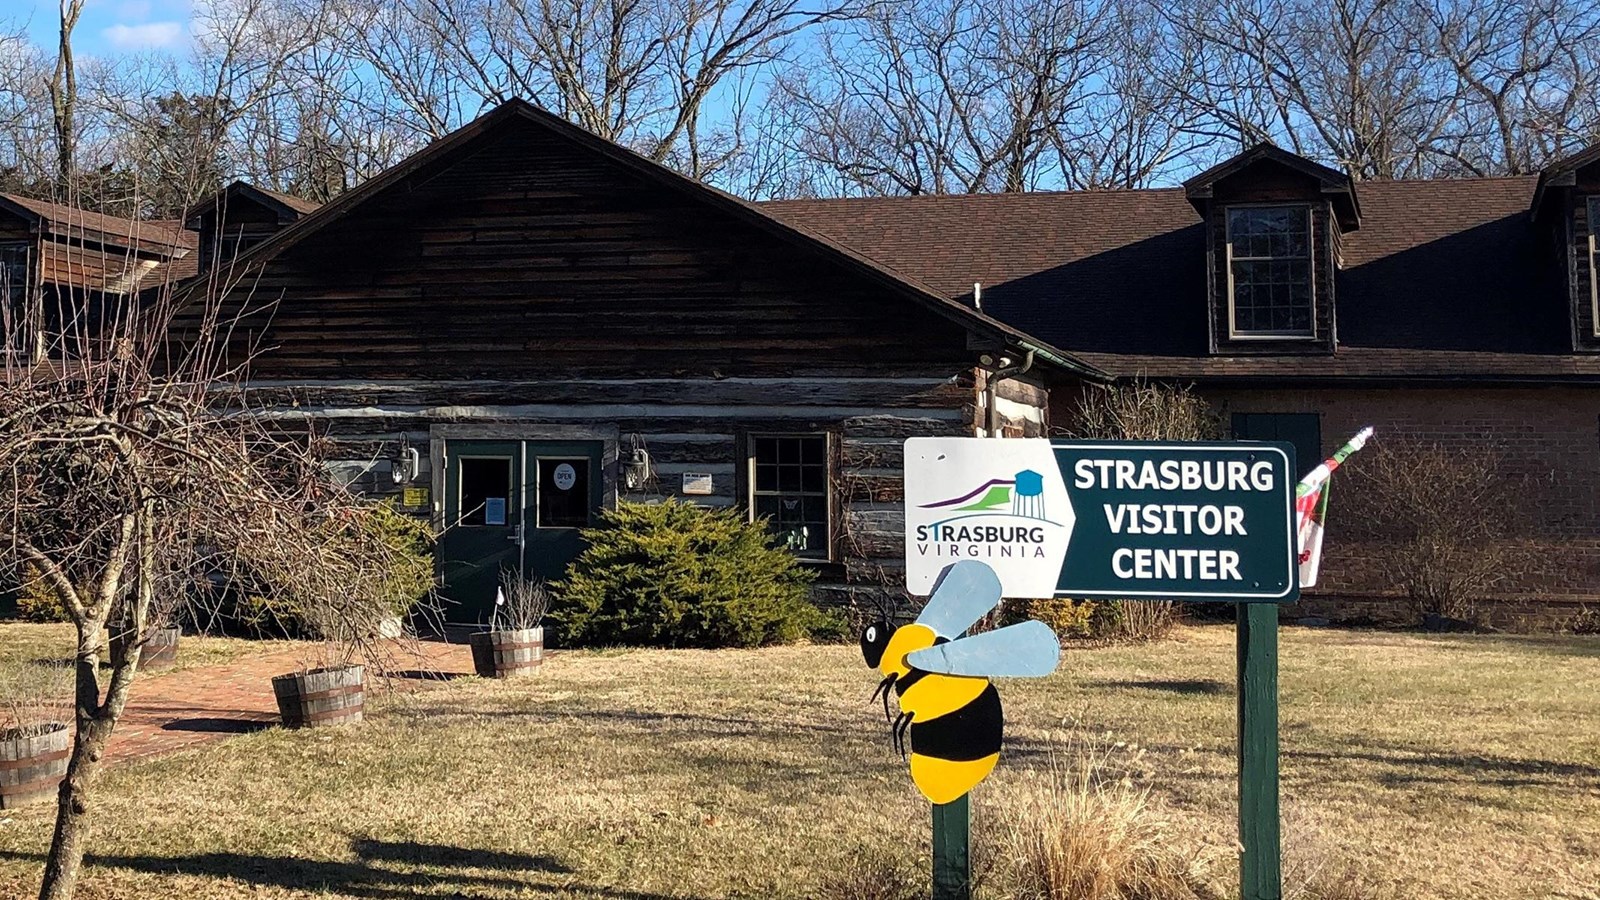 A sign in front of a rustic style building marks the Strasburg Visitor Center.